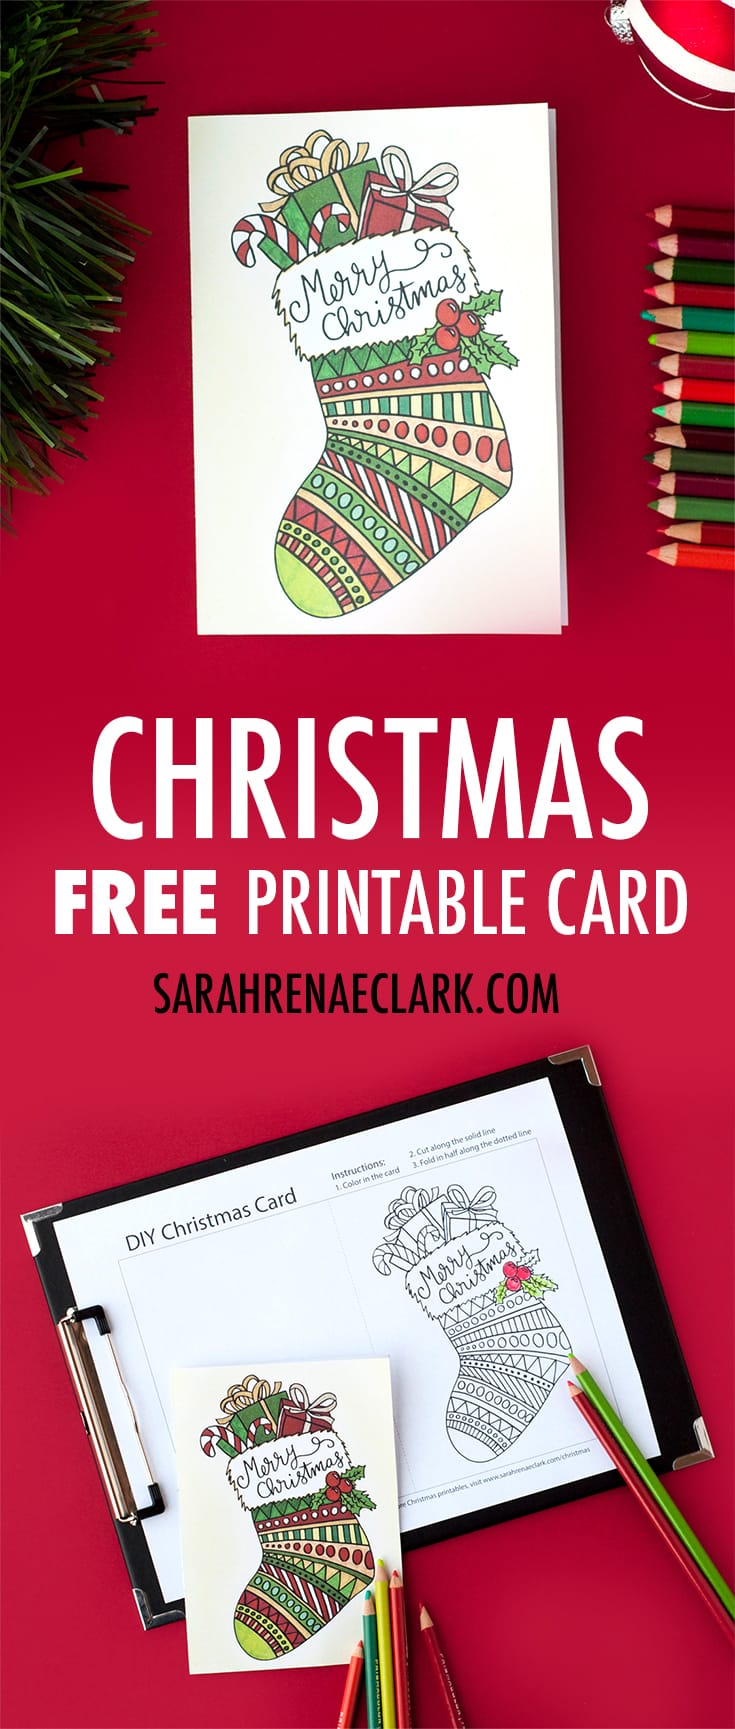 Free Christmas card printable template // Find more coloring Christmas printables at sarahrenaeclark.com #free #christmas #printable